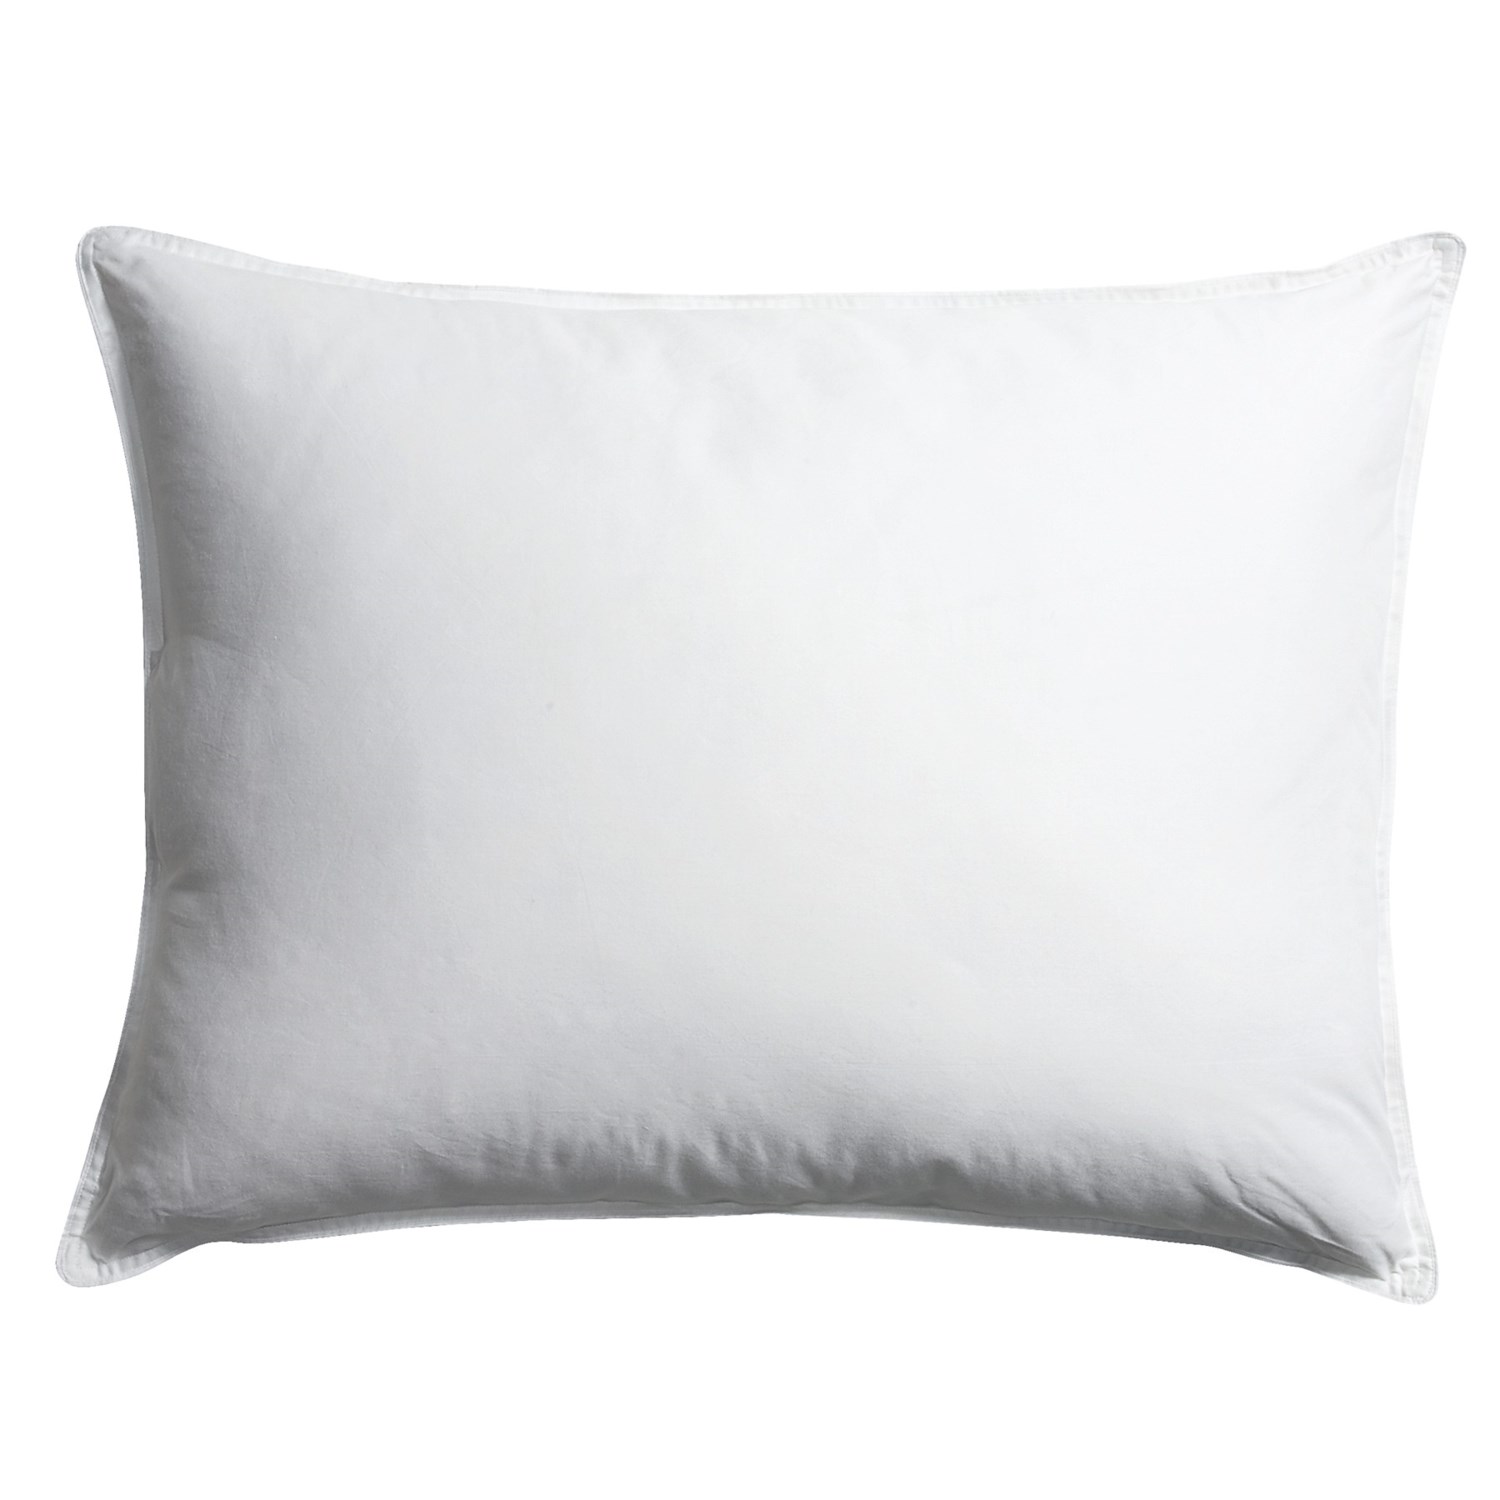 DownTown Villa Collection Down Pillow - Standard - Save 36